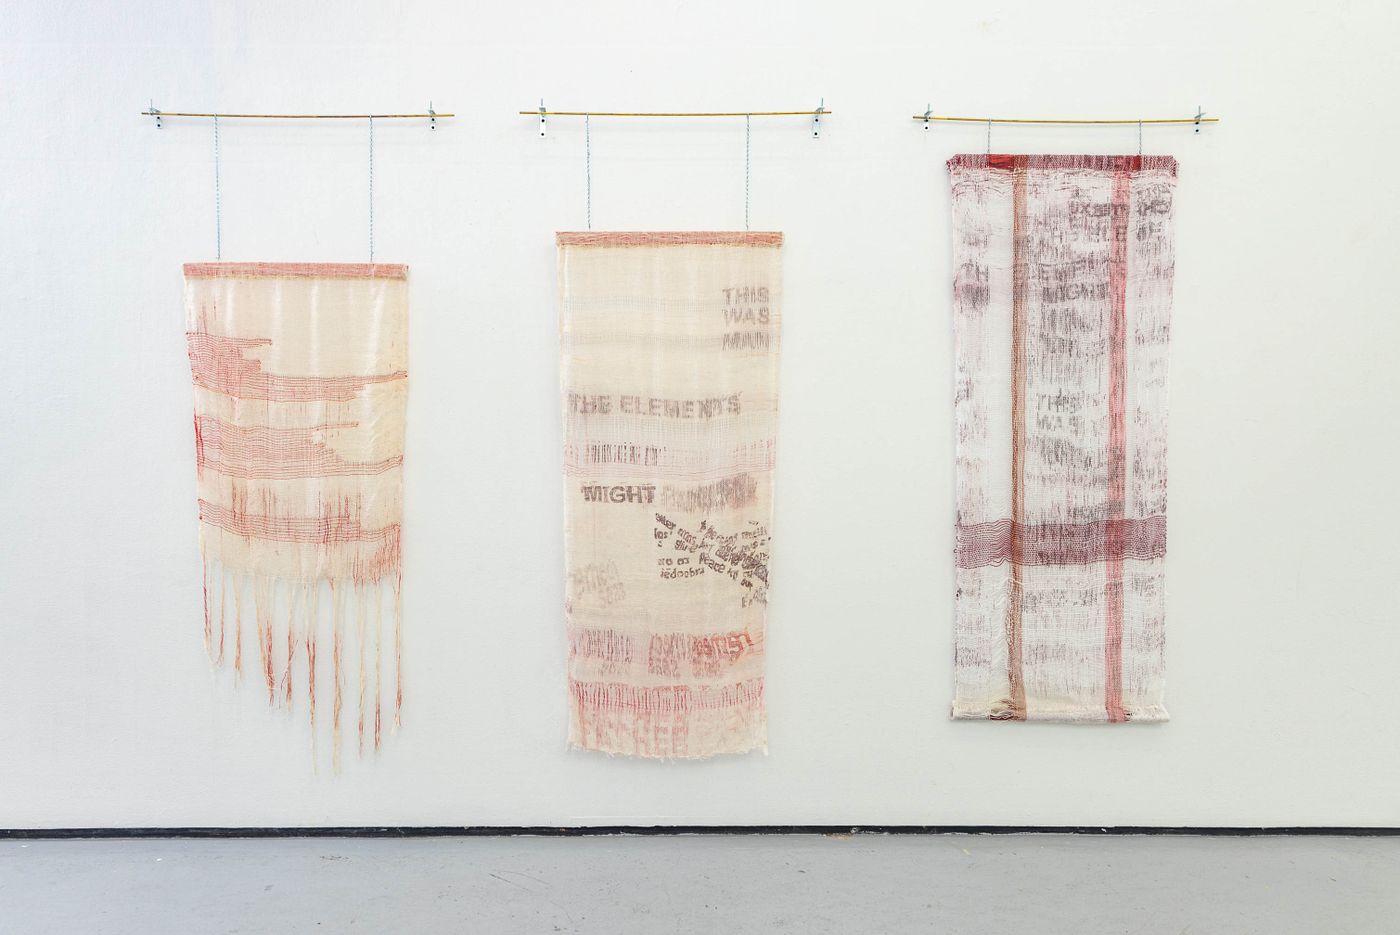 left to right: Redacted Stanzas, THE ELEMENTS MIGHT STAND UP, THE ELEMENTS MIGHT, 2022. Woven on rigid heddle loom with dye and leno-weave; 25 x 62 in., 25.5 x 62.5 in., 26 x 67 in. Photo: Meghan Olson.